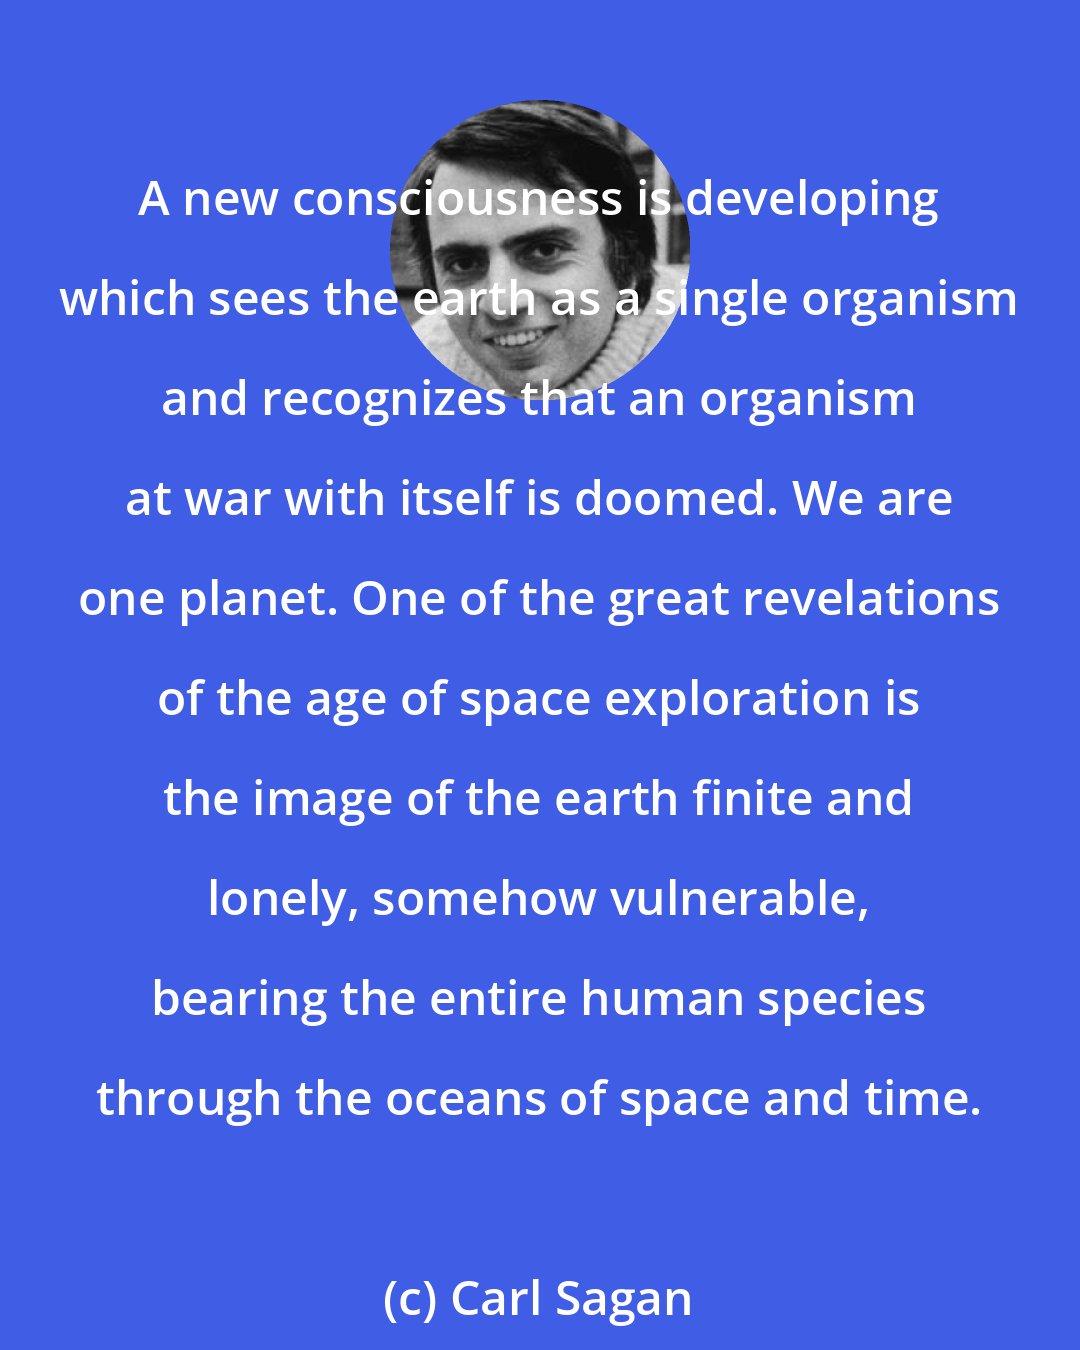 Carl Sagan: A new consciousness is developing which sees the earth as a single organism and recognizes that an organism at war with itself is doomed. We are one planet. One of the great revelations of the age of space exploration is the image of the earth finite and lonely, somehow vulnerable, bearing the entire human species through the oceans of space and time.